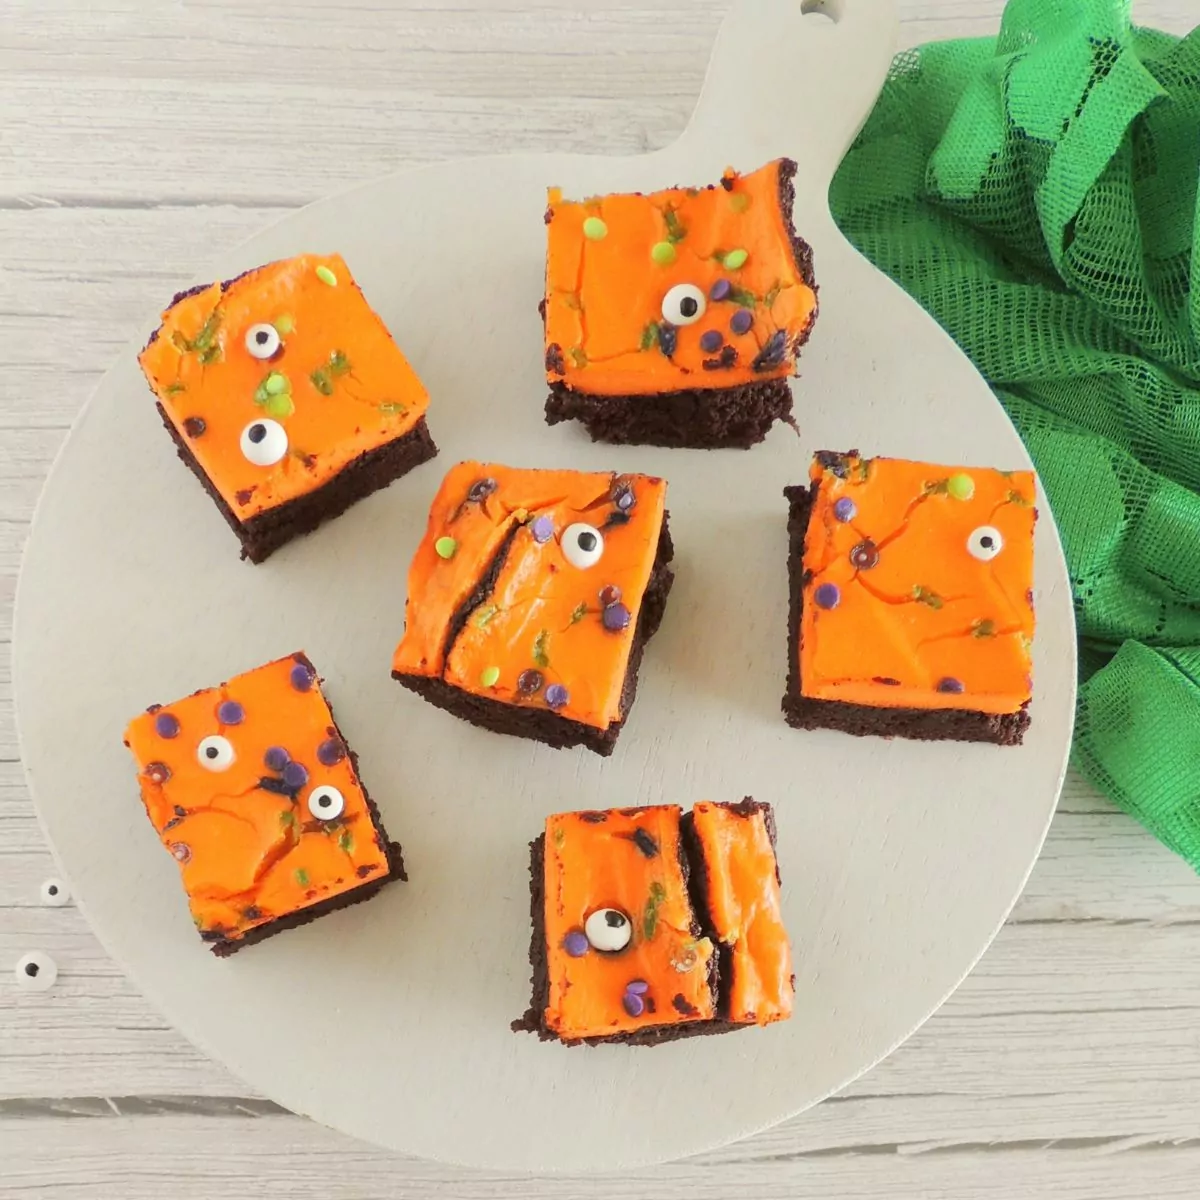 Brownies for Halloween on white plate with green napkin.